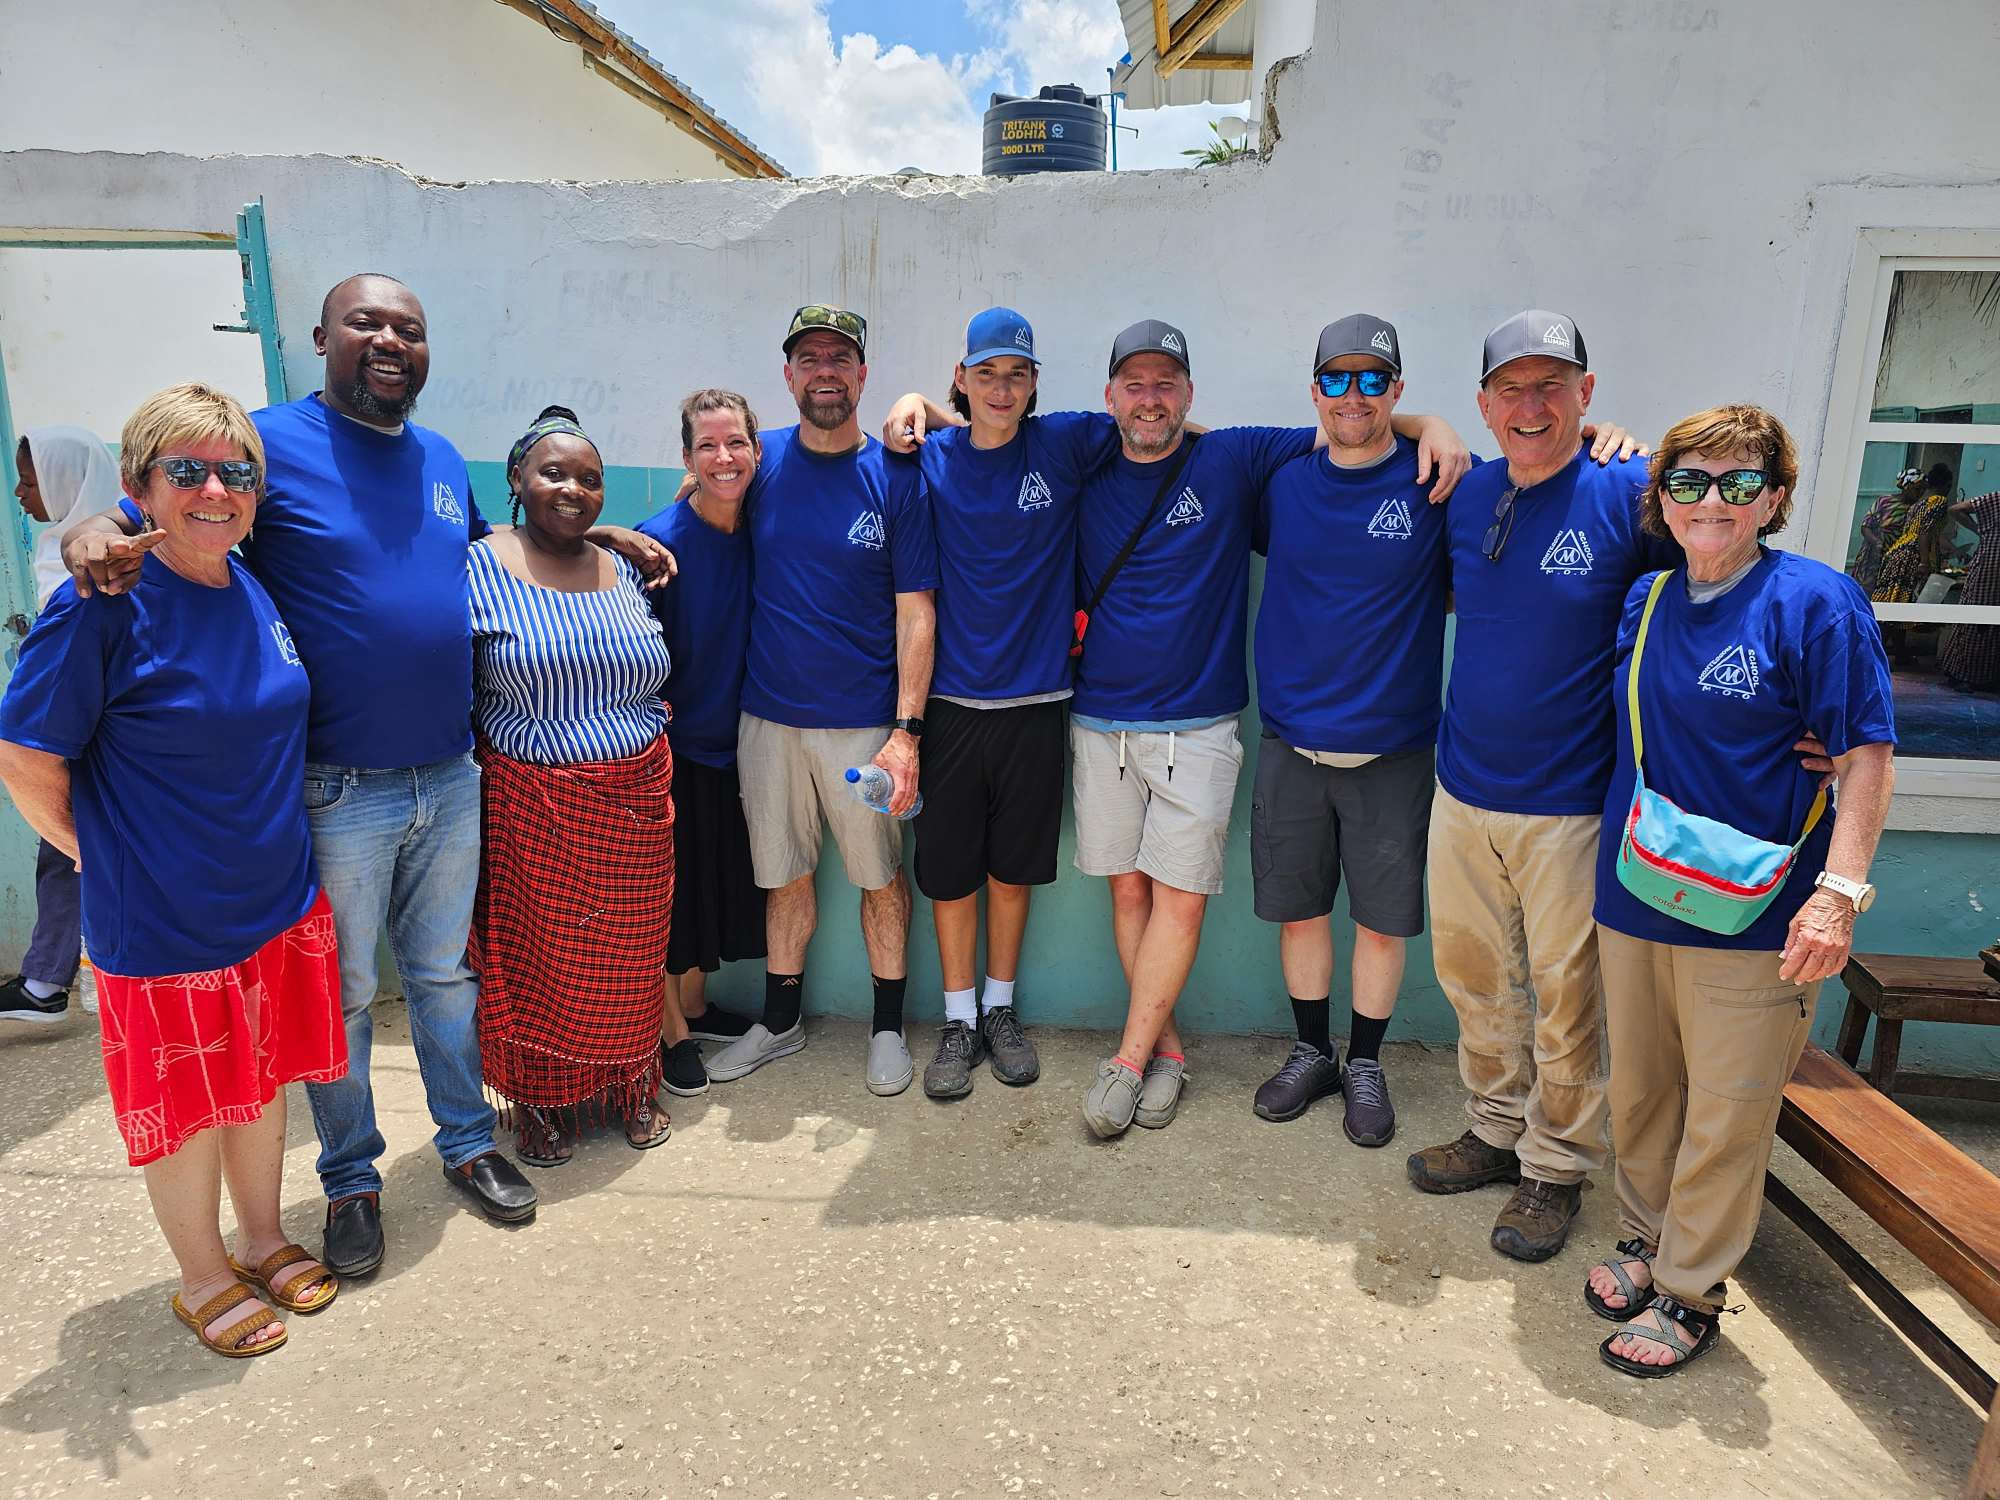  Suzana Maziku, Founder and Head of the Montessori Orphanage and School (third from the left) with Summit Energy's James Truax, Chief Revenue Officer (fifth from the left) and Summit's Eric Israelsen, Cofounder, and Chief Empower Officer (third from right) along with friends and members of their families after a full day assisting with the newly donated construction.  